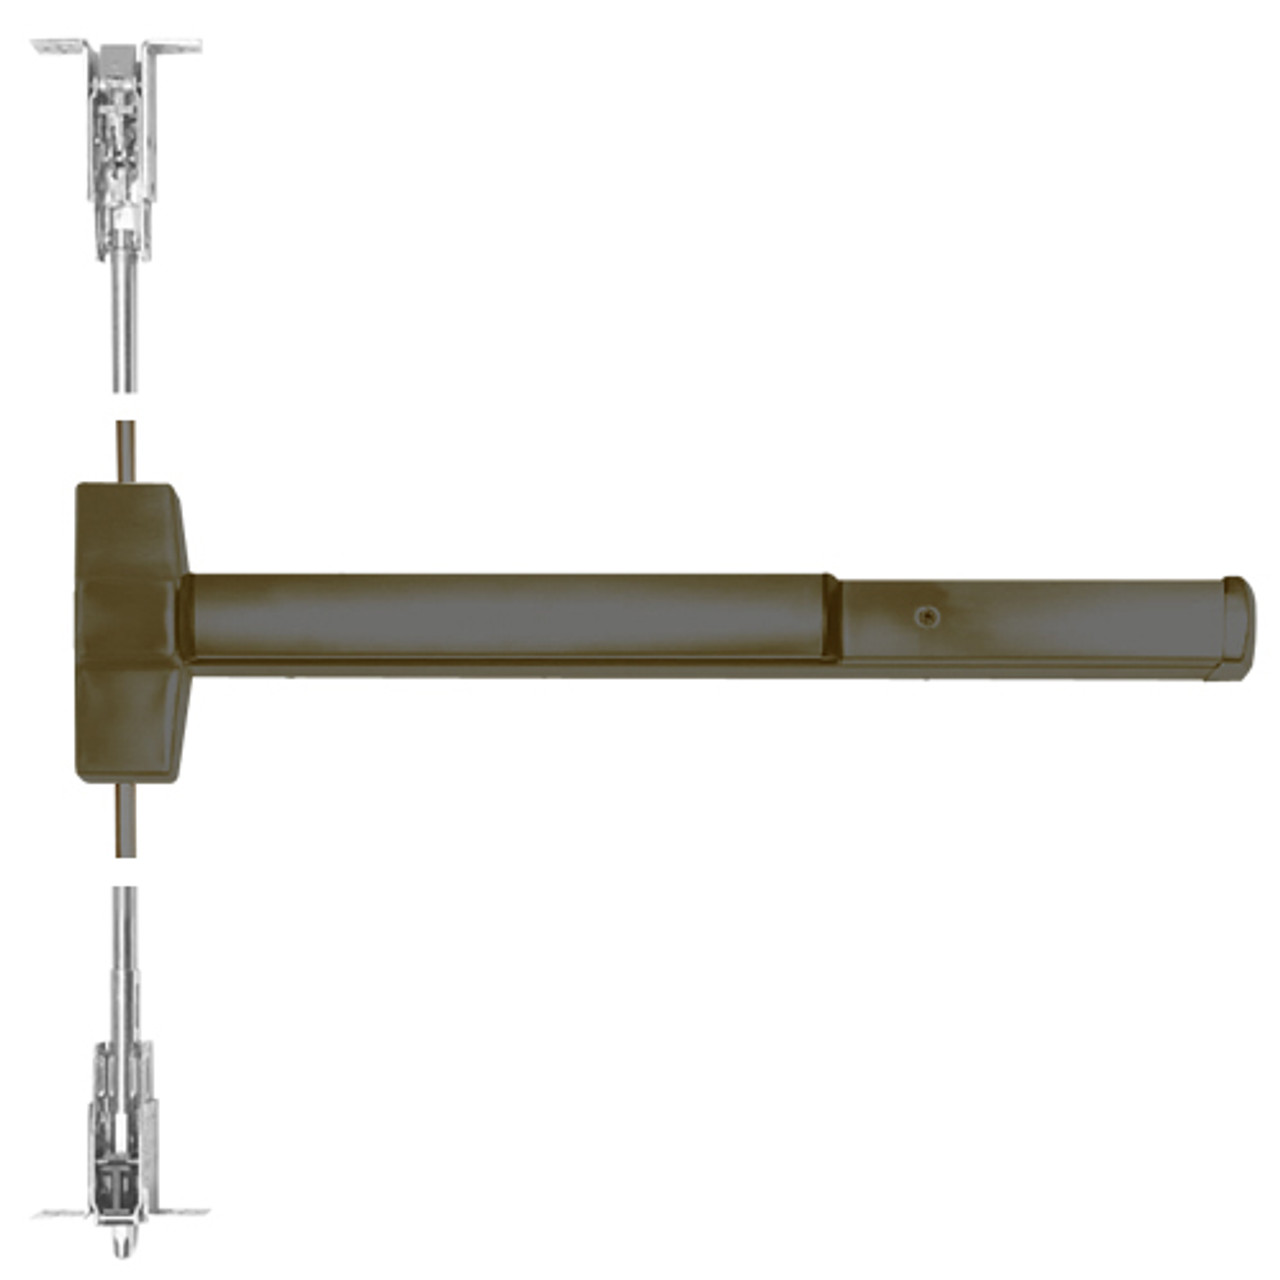 ED5800-613-MELR-M92 Corbin ED5800 Series Non Fire Rated Concealed Vertical Rod Device with Motor Latch Retraction and Touchbar Monitoring in Oil Rubbed Bronze Finish